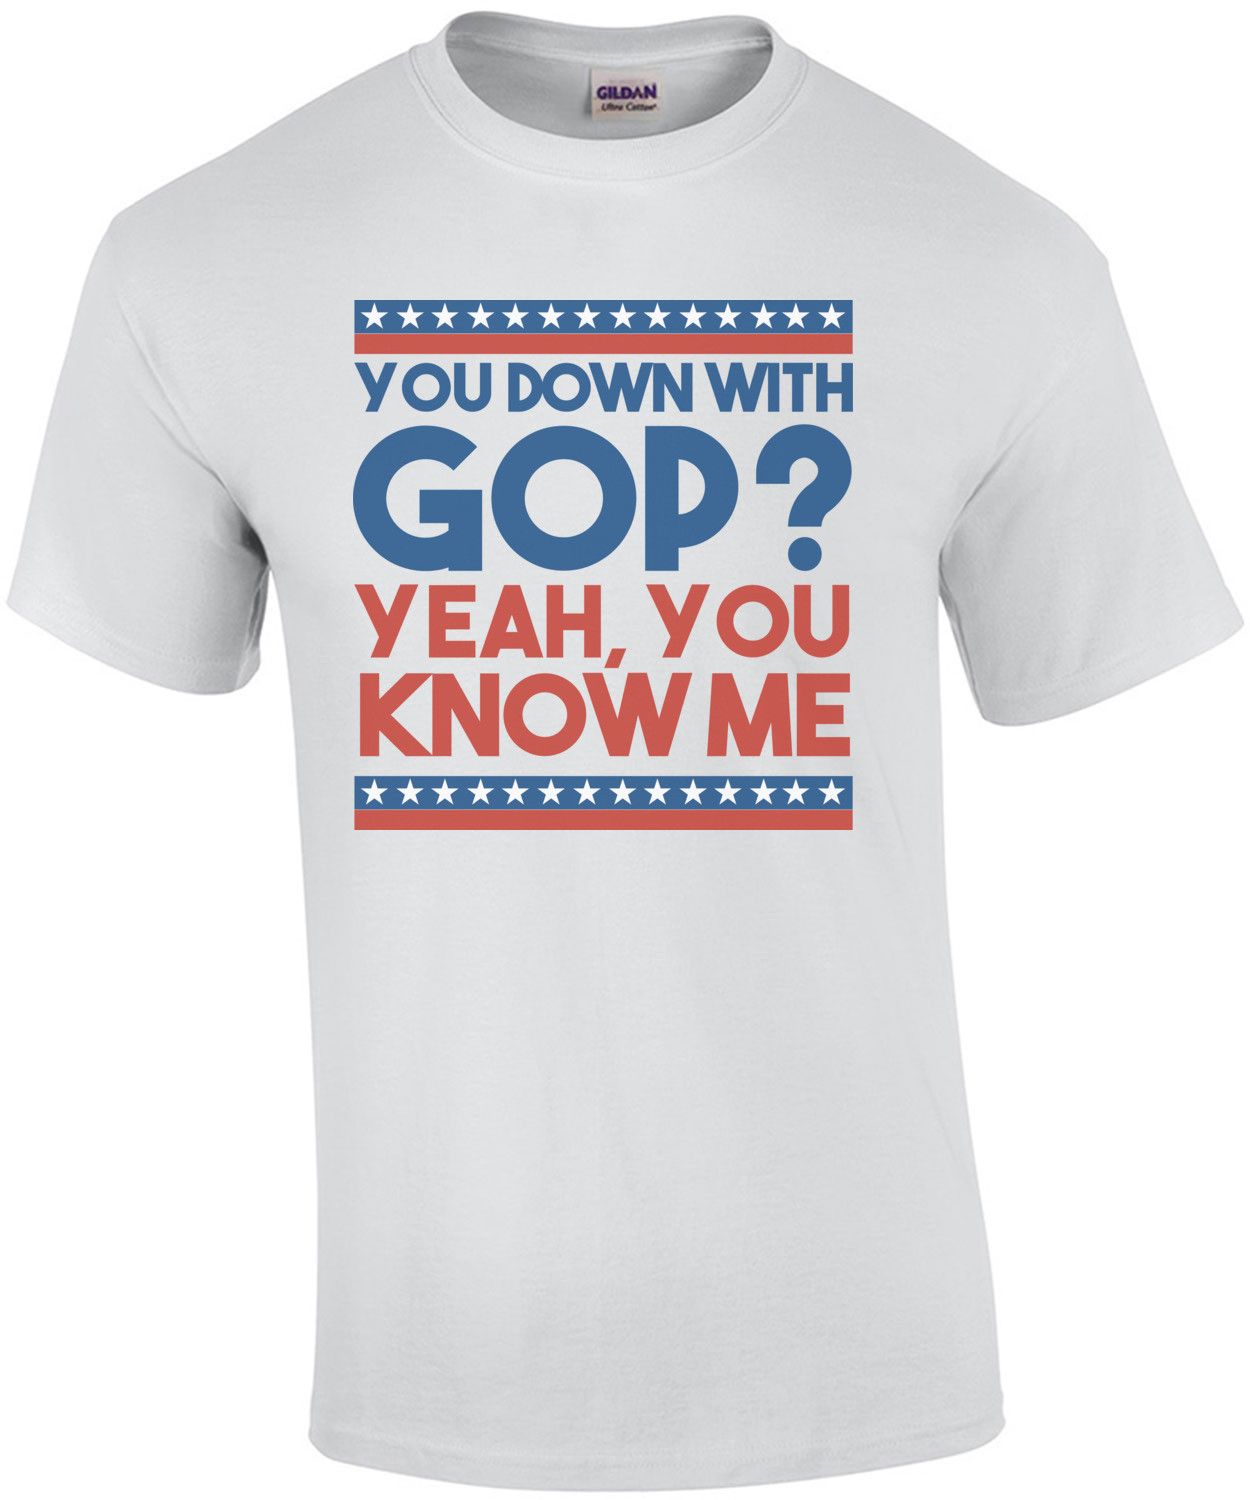 You down with GOP? Yeah, you know me T-Shirt